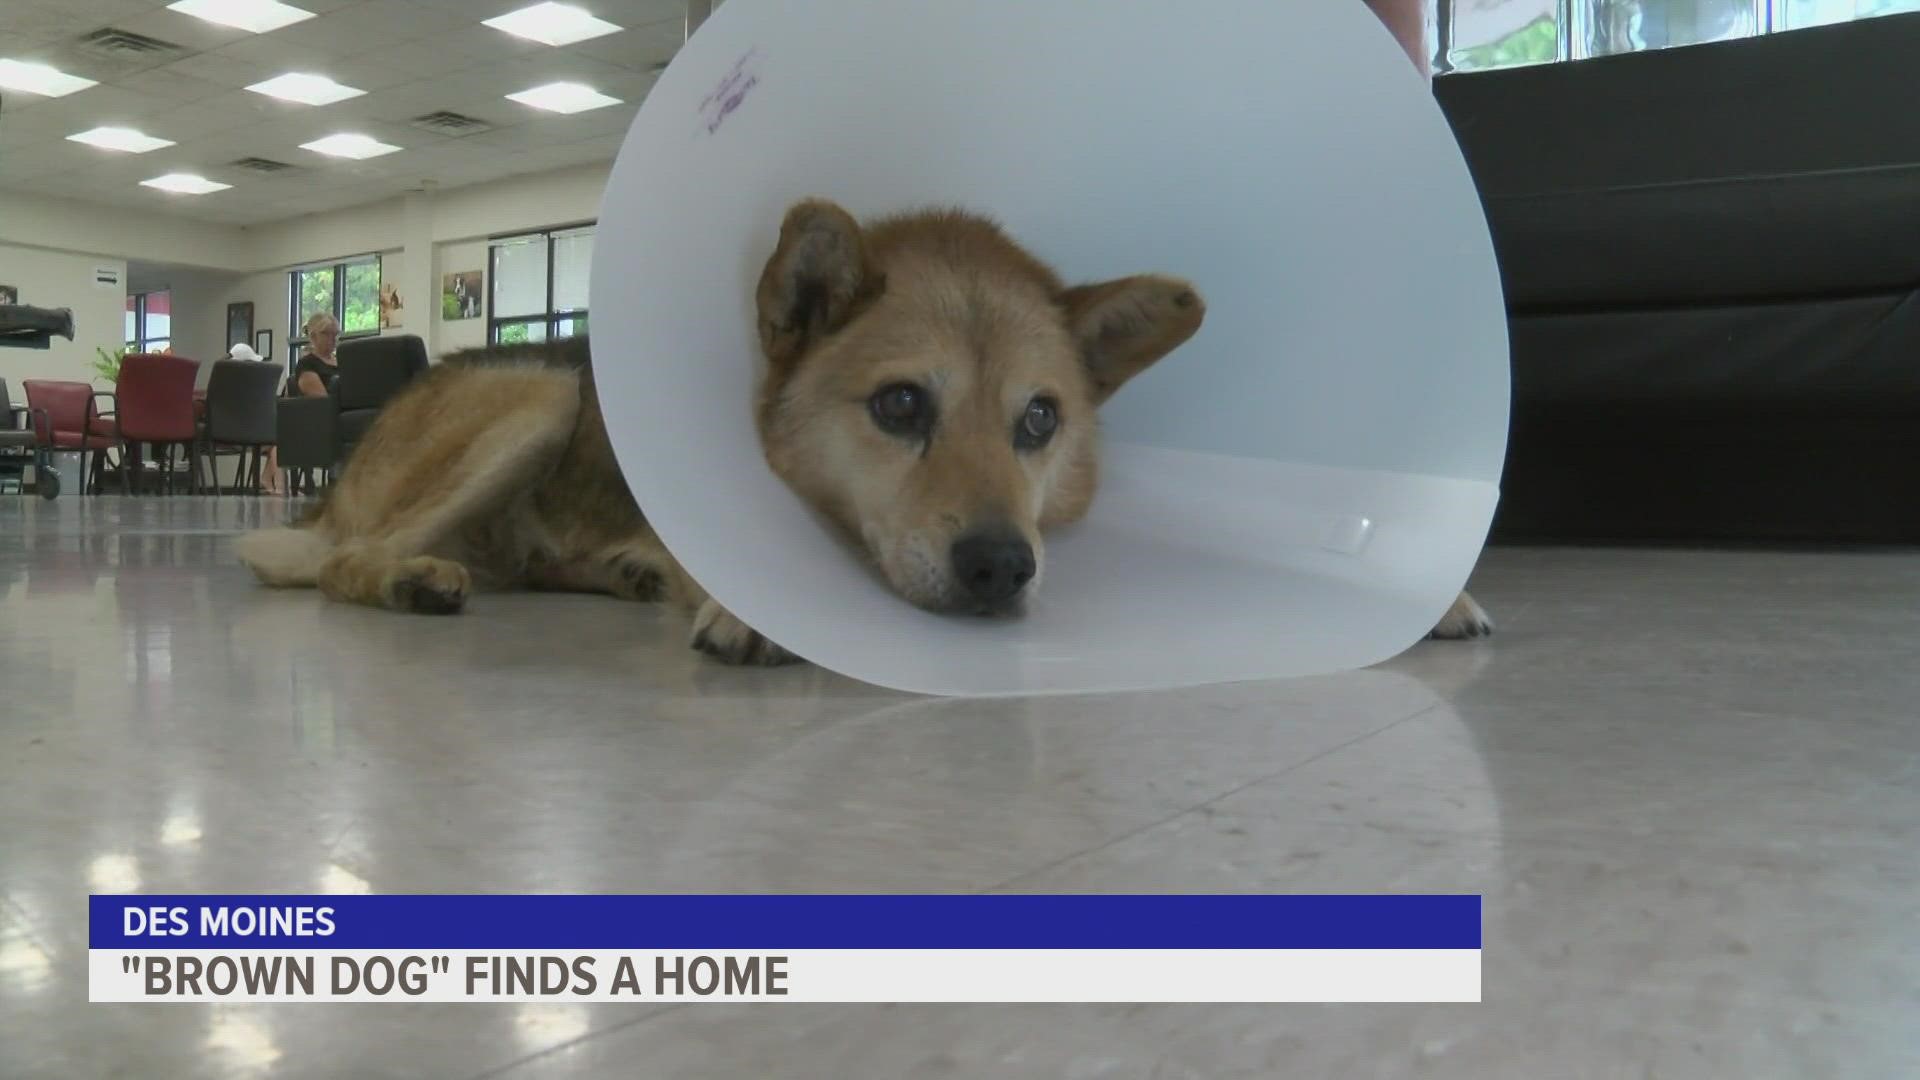 The Perry community had been putting out food and bedding for "Brown Dog" for years, but after breaking his leg the stray finally found his forever home.